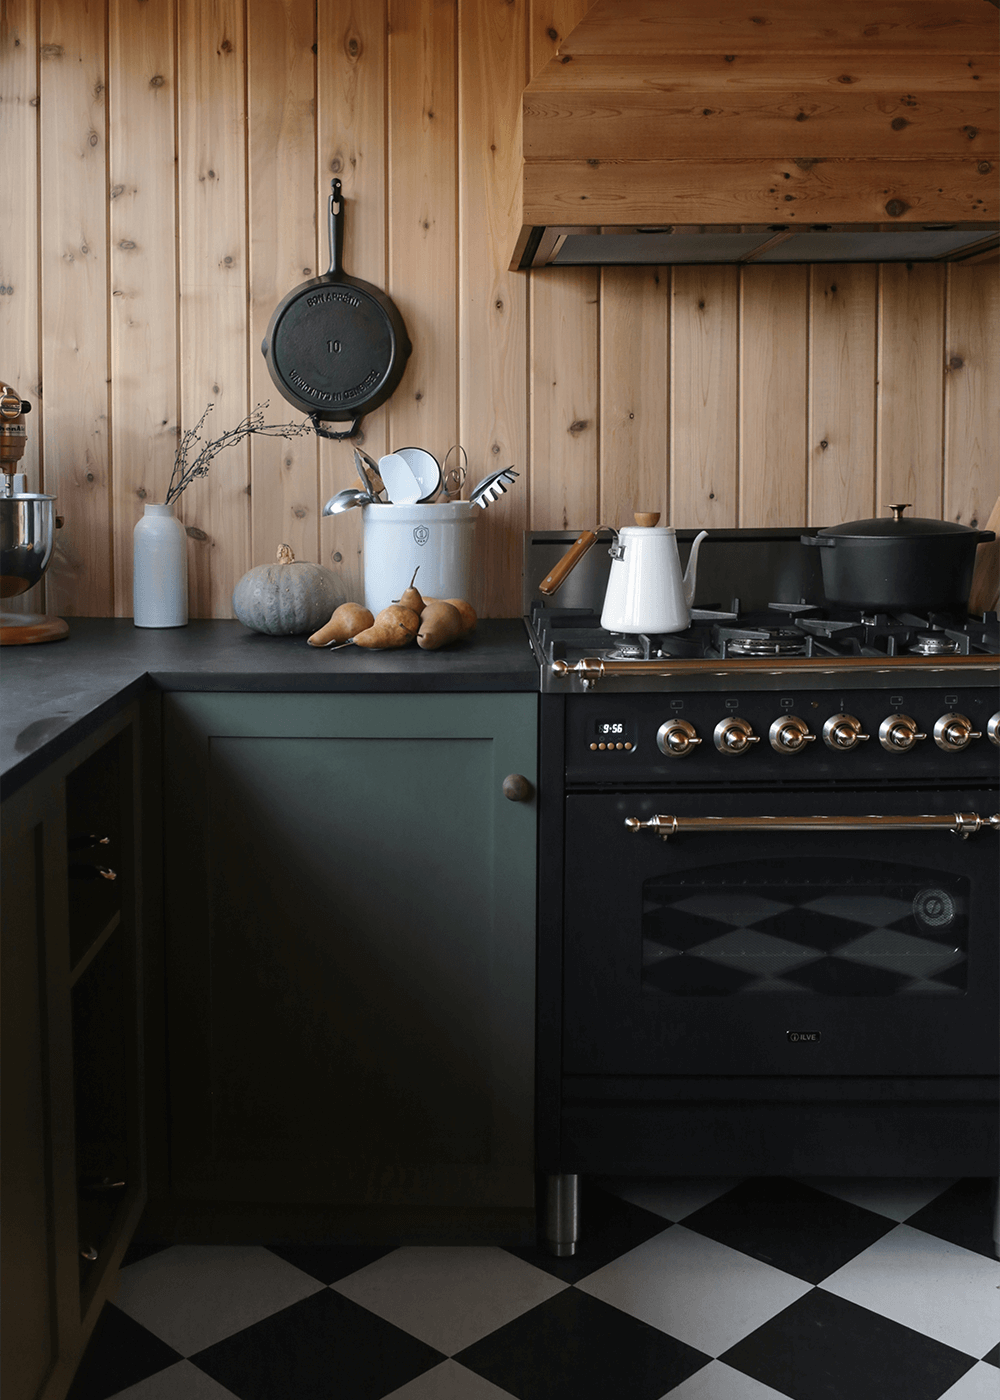 the minne stuga cabin kitchen by melissa Coleman of The Faux Martha